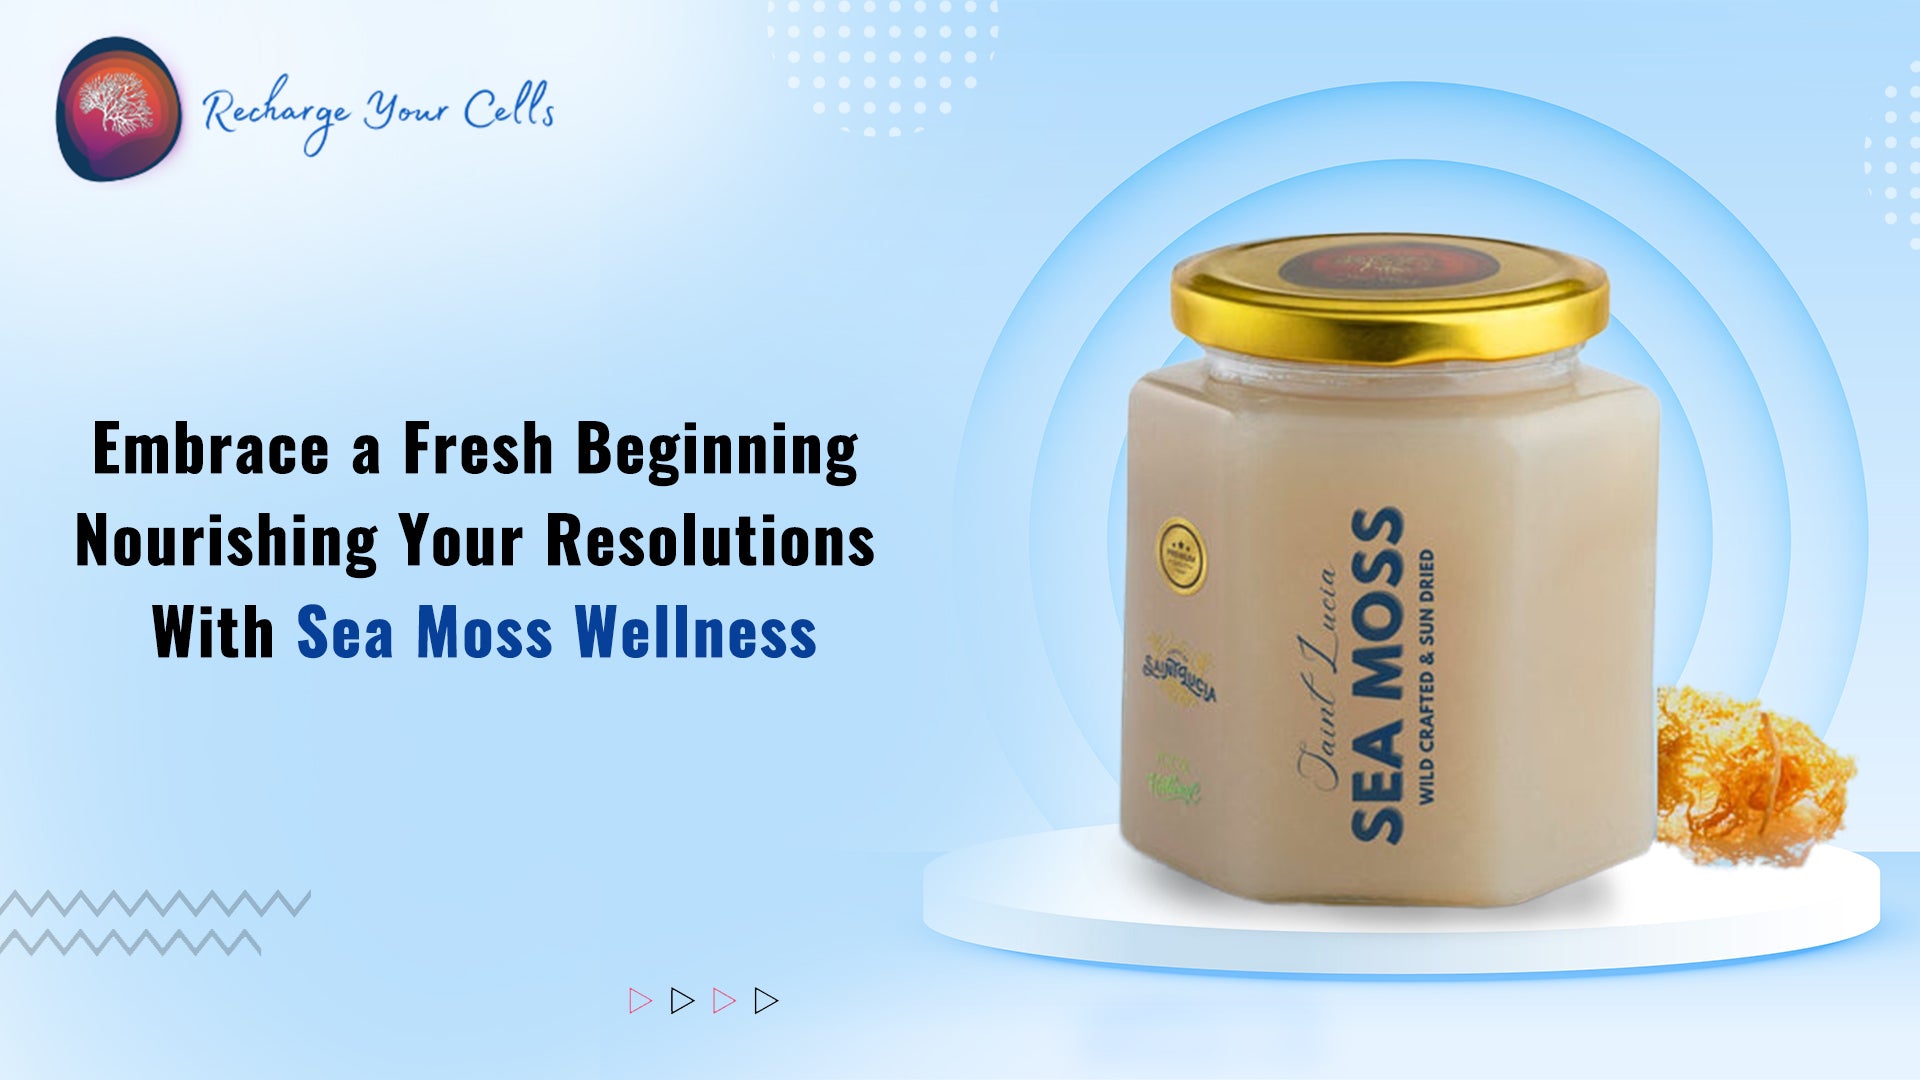 Embrace a Fresh Beginning - Nourishing Your Resolutions with Sea Moss Wellness